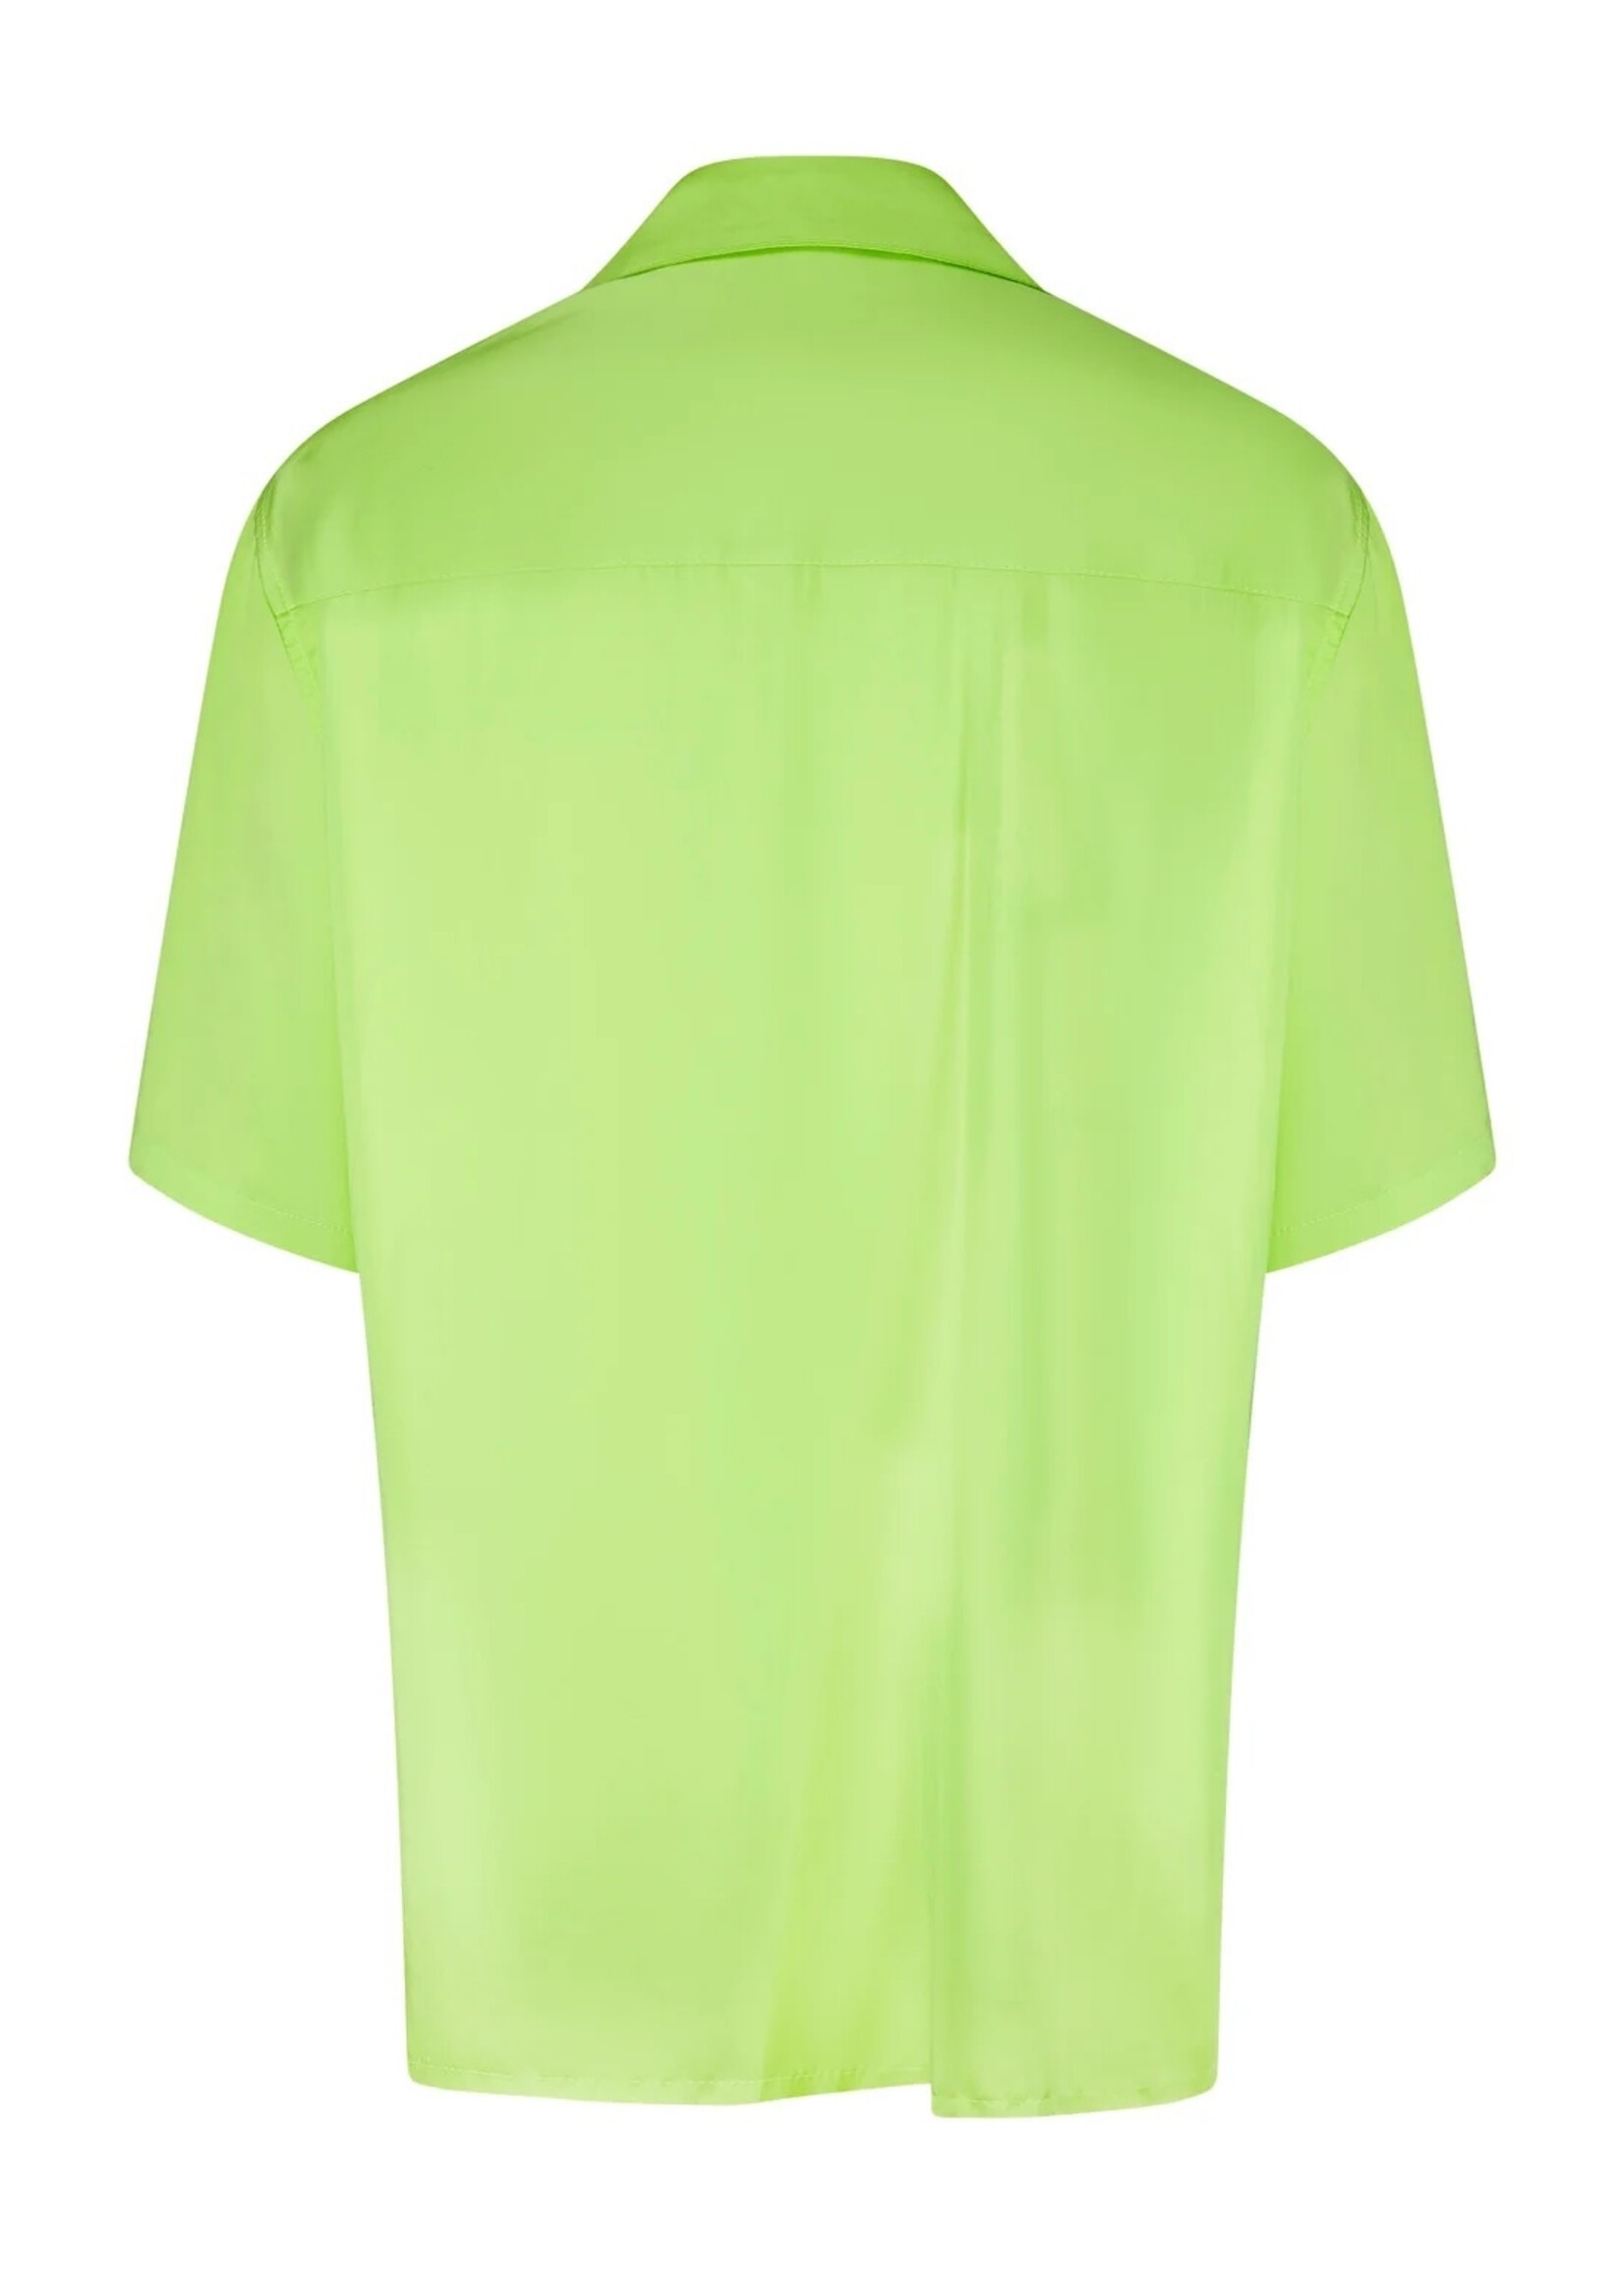 MARTINE ROSE Camisole Button up Shirt in Lime